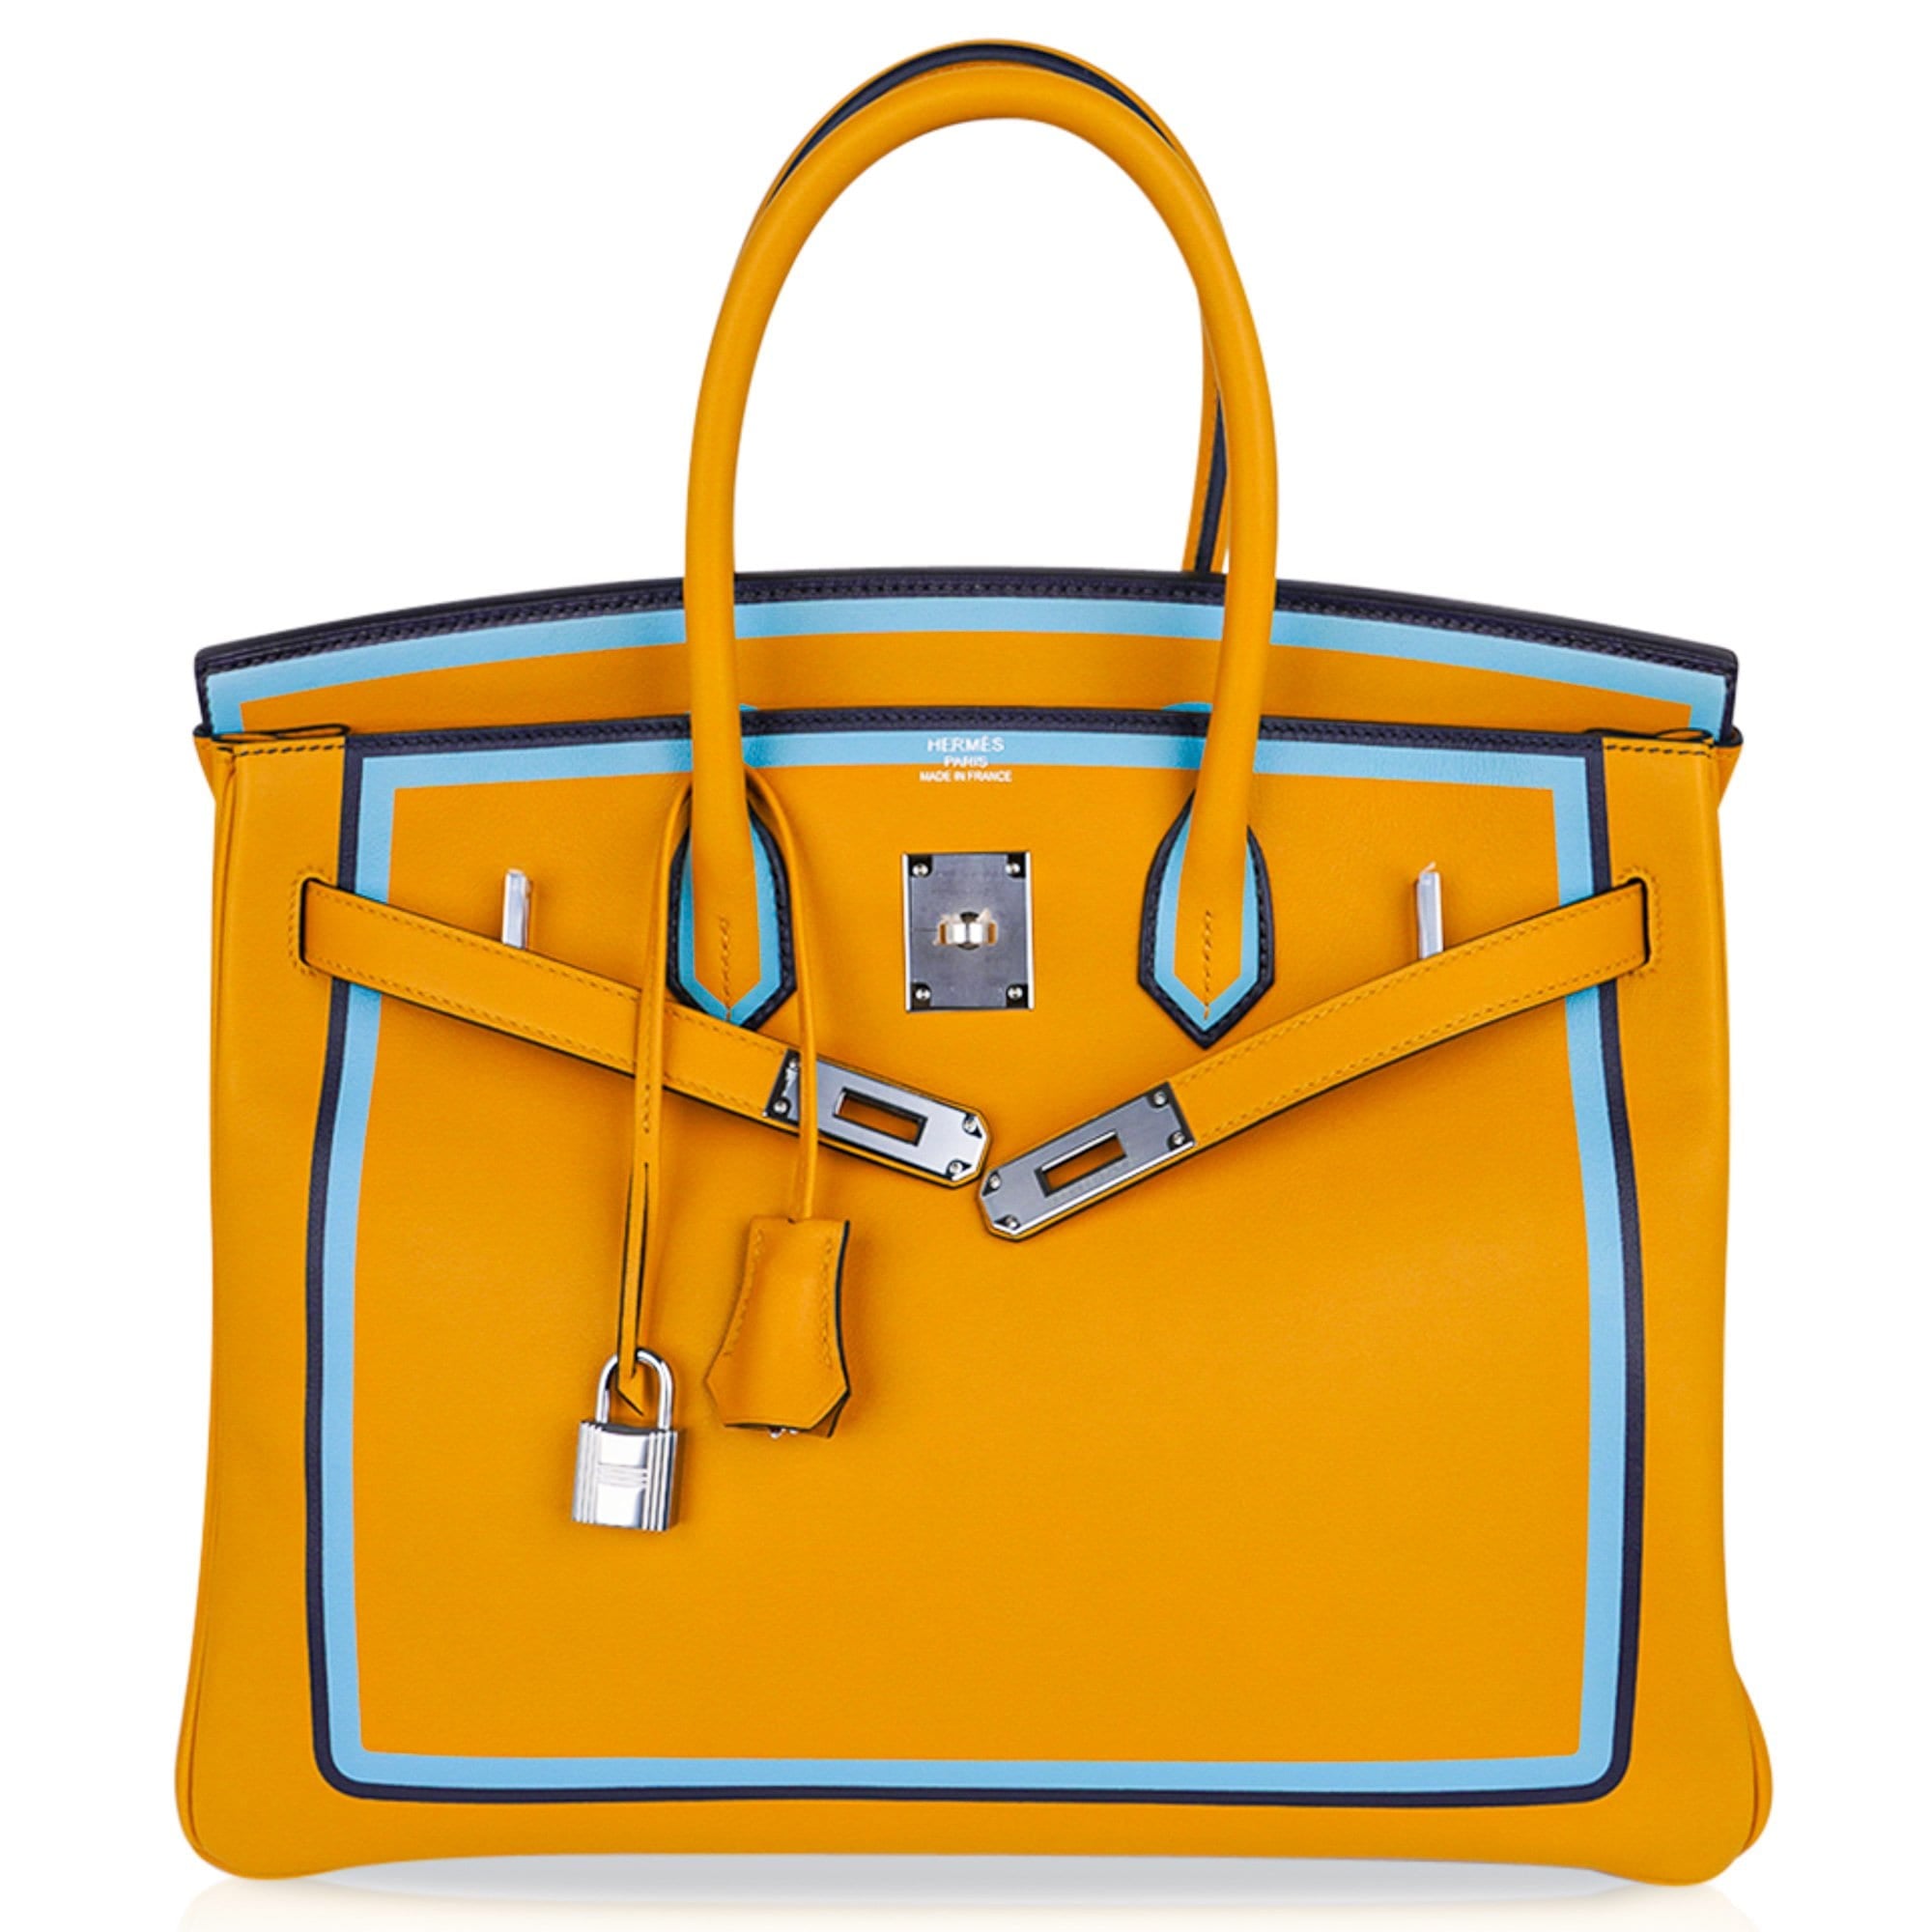 Hermes Limited Edition Candy Collection 30cm Blue Celeste